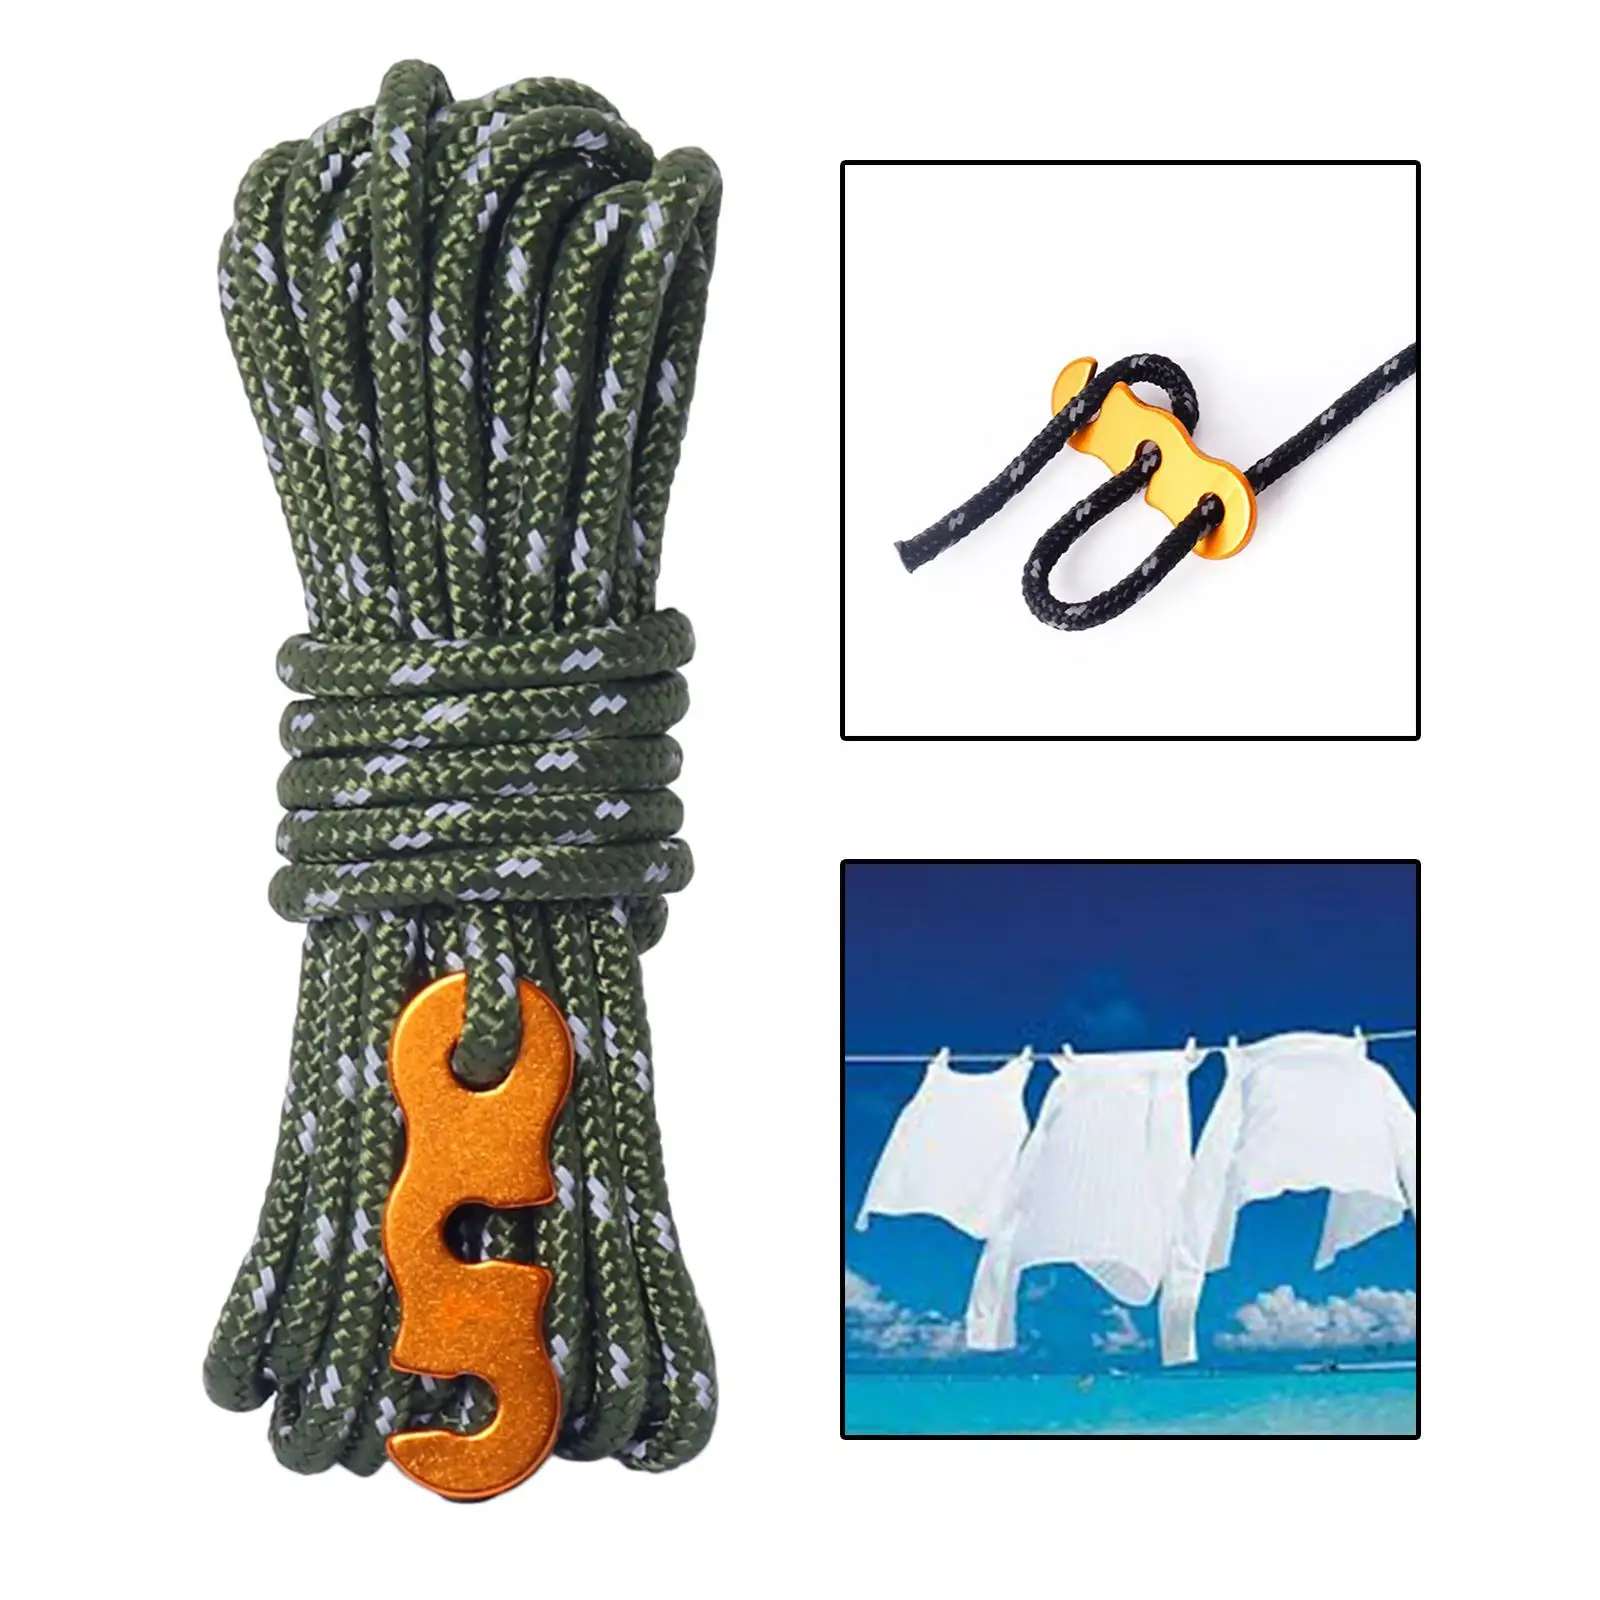 4 Meter 4mm Reflective guyline Rope Camping Tent Cord 300kg Strong Pulling Force Weighs Only 51 Grams Essential Accessory